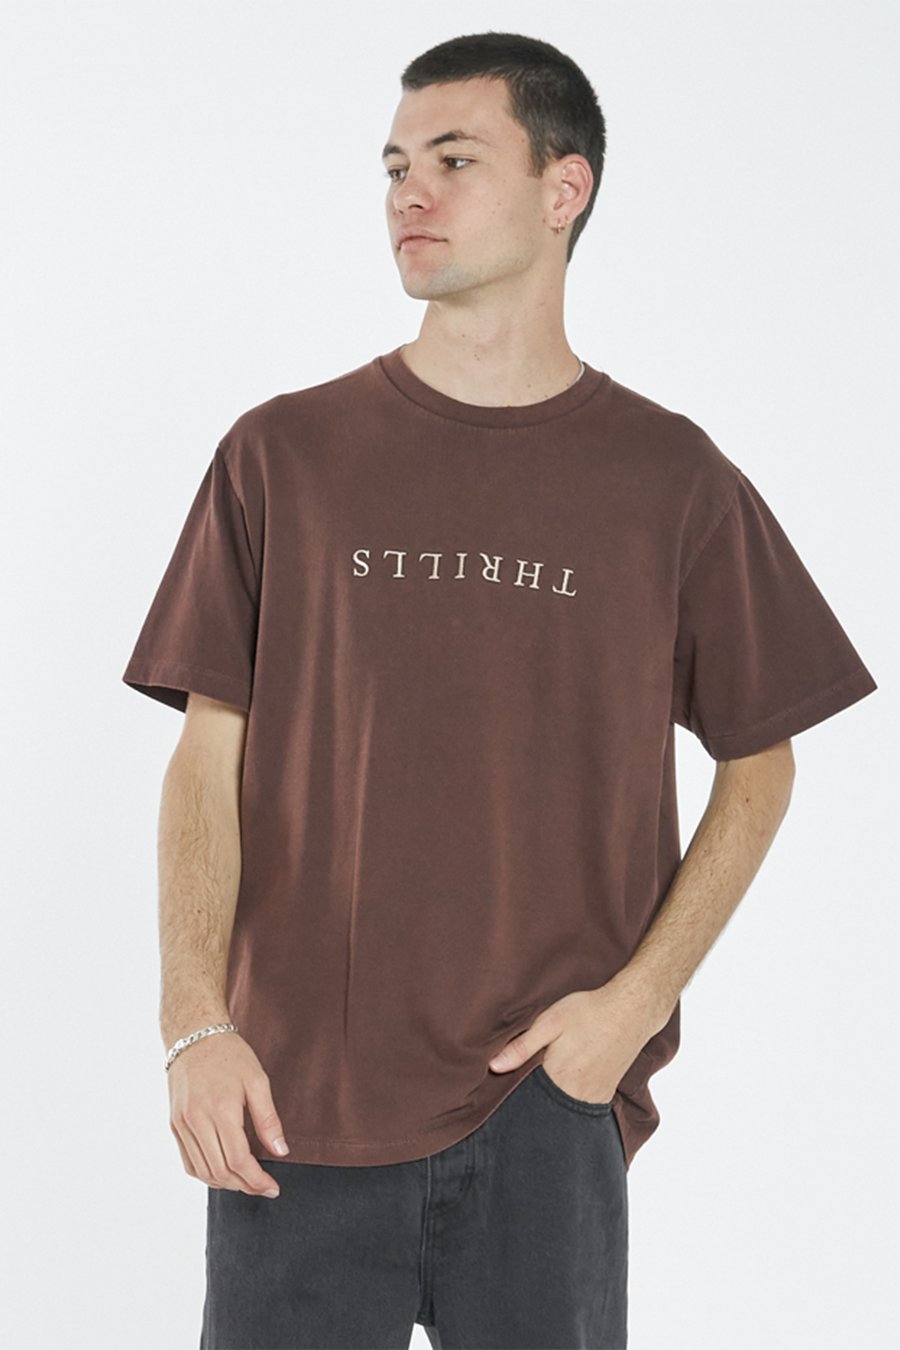 Liste Embro Merch Tee | Washed Cocoa - Main Image Number 1 of 2